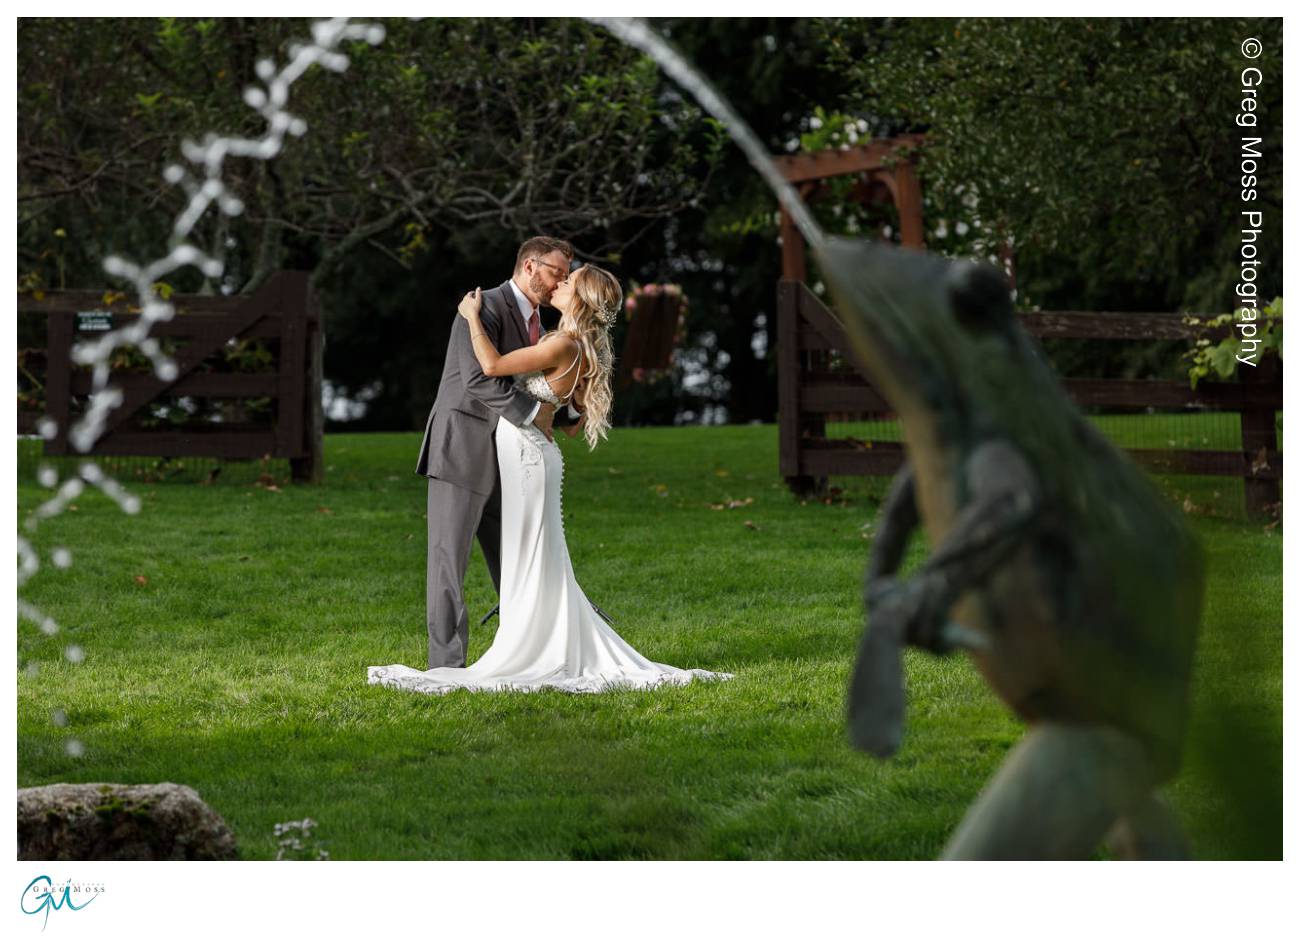 A bride and groom embracing and kissing in a lush garden at Zukas Hilltop Barn, with a statue and water spray in the foreground.